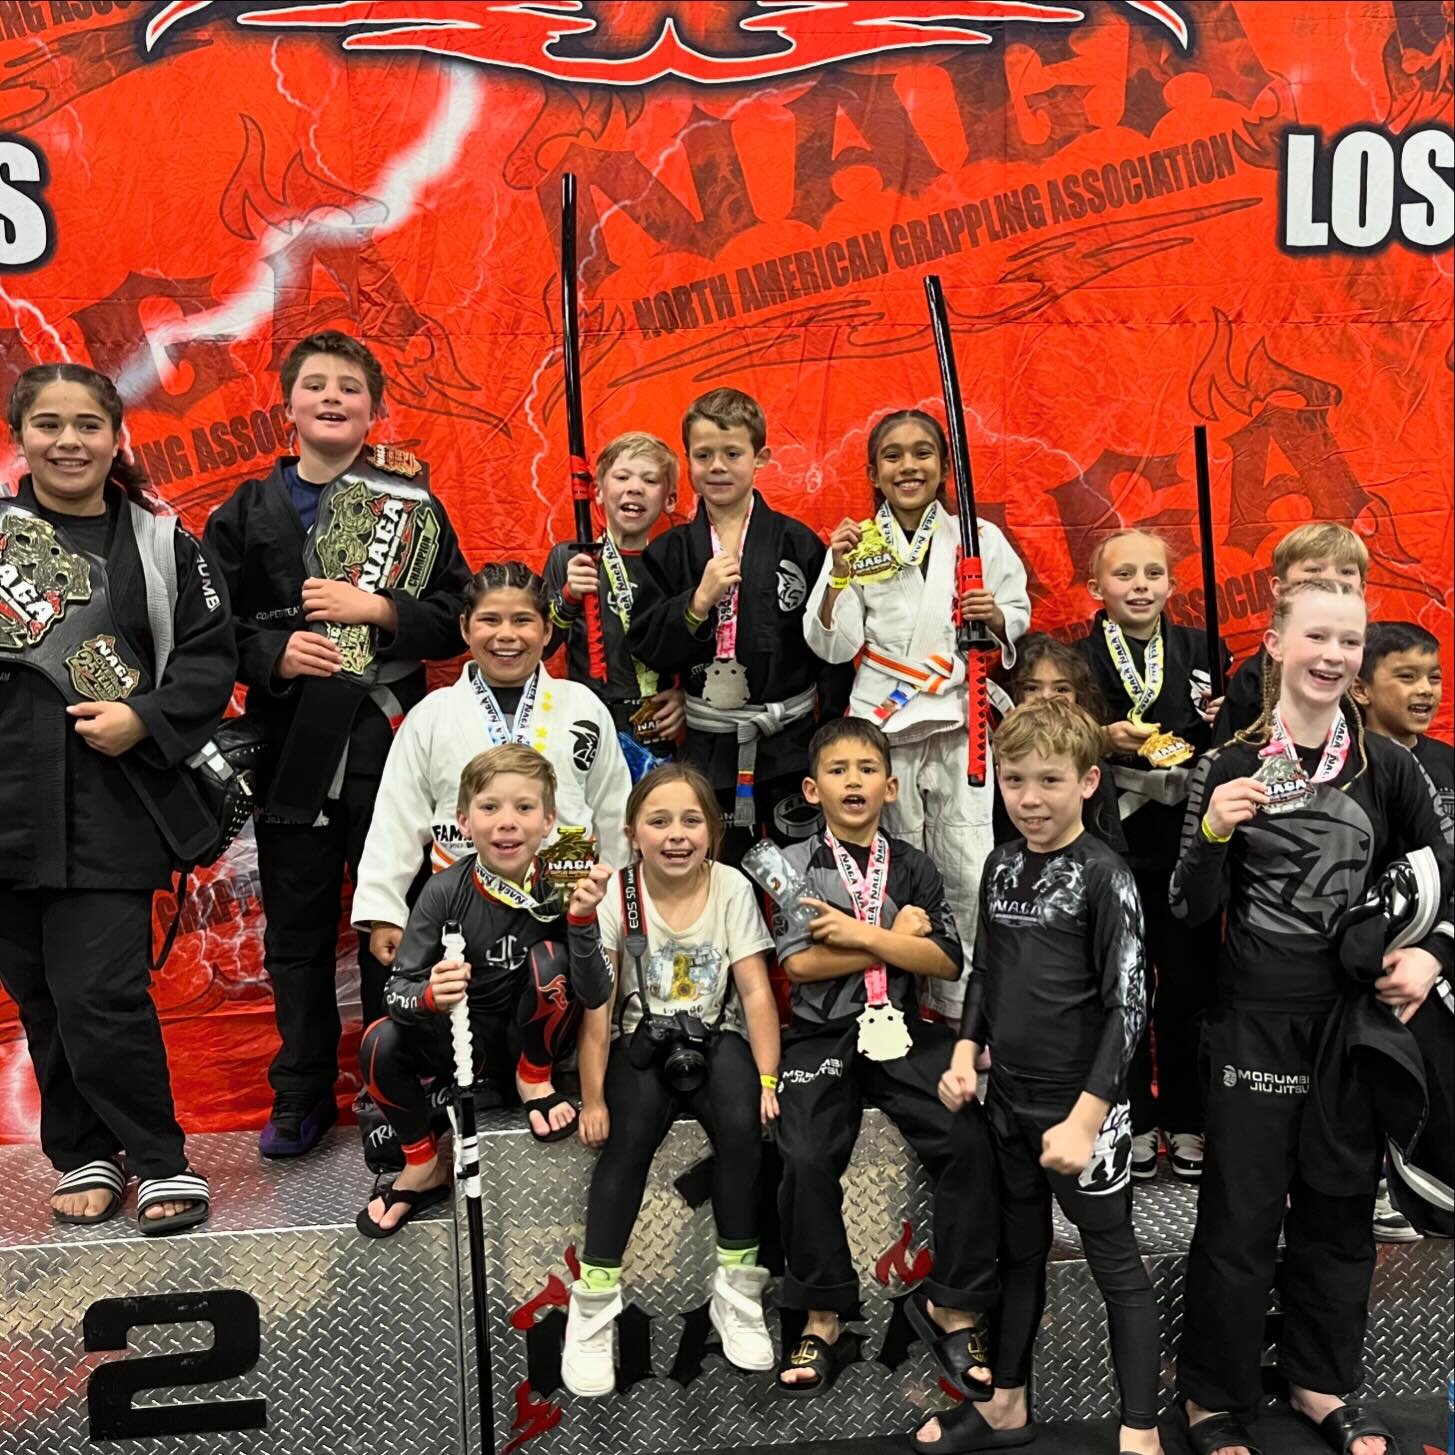 Another successful kids tournament!!
Our competition kids team is doing great and so many new tournaments coming!! 👋🏼👋🏼👋🏼
#buildingchampionsforlife #morumbijiujitsufamily🇺🇸🇧🇷 #ryangracielegacy